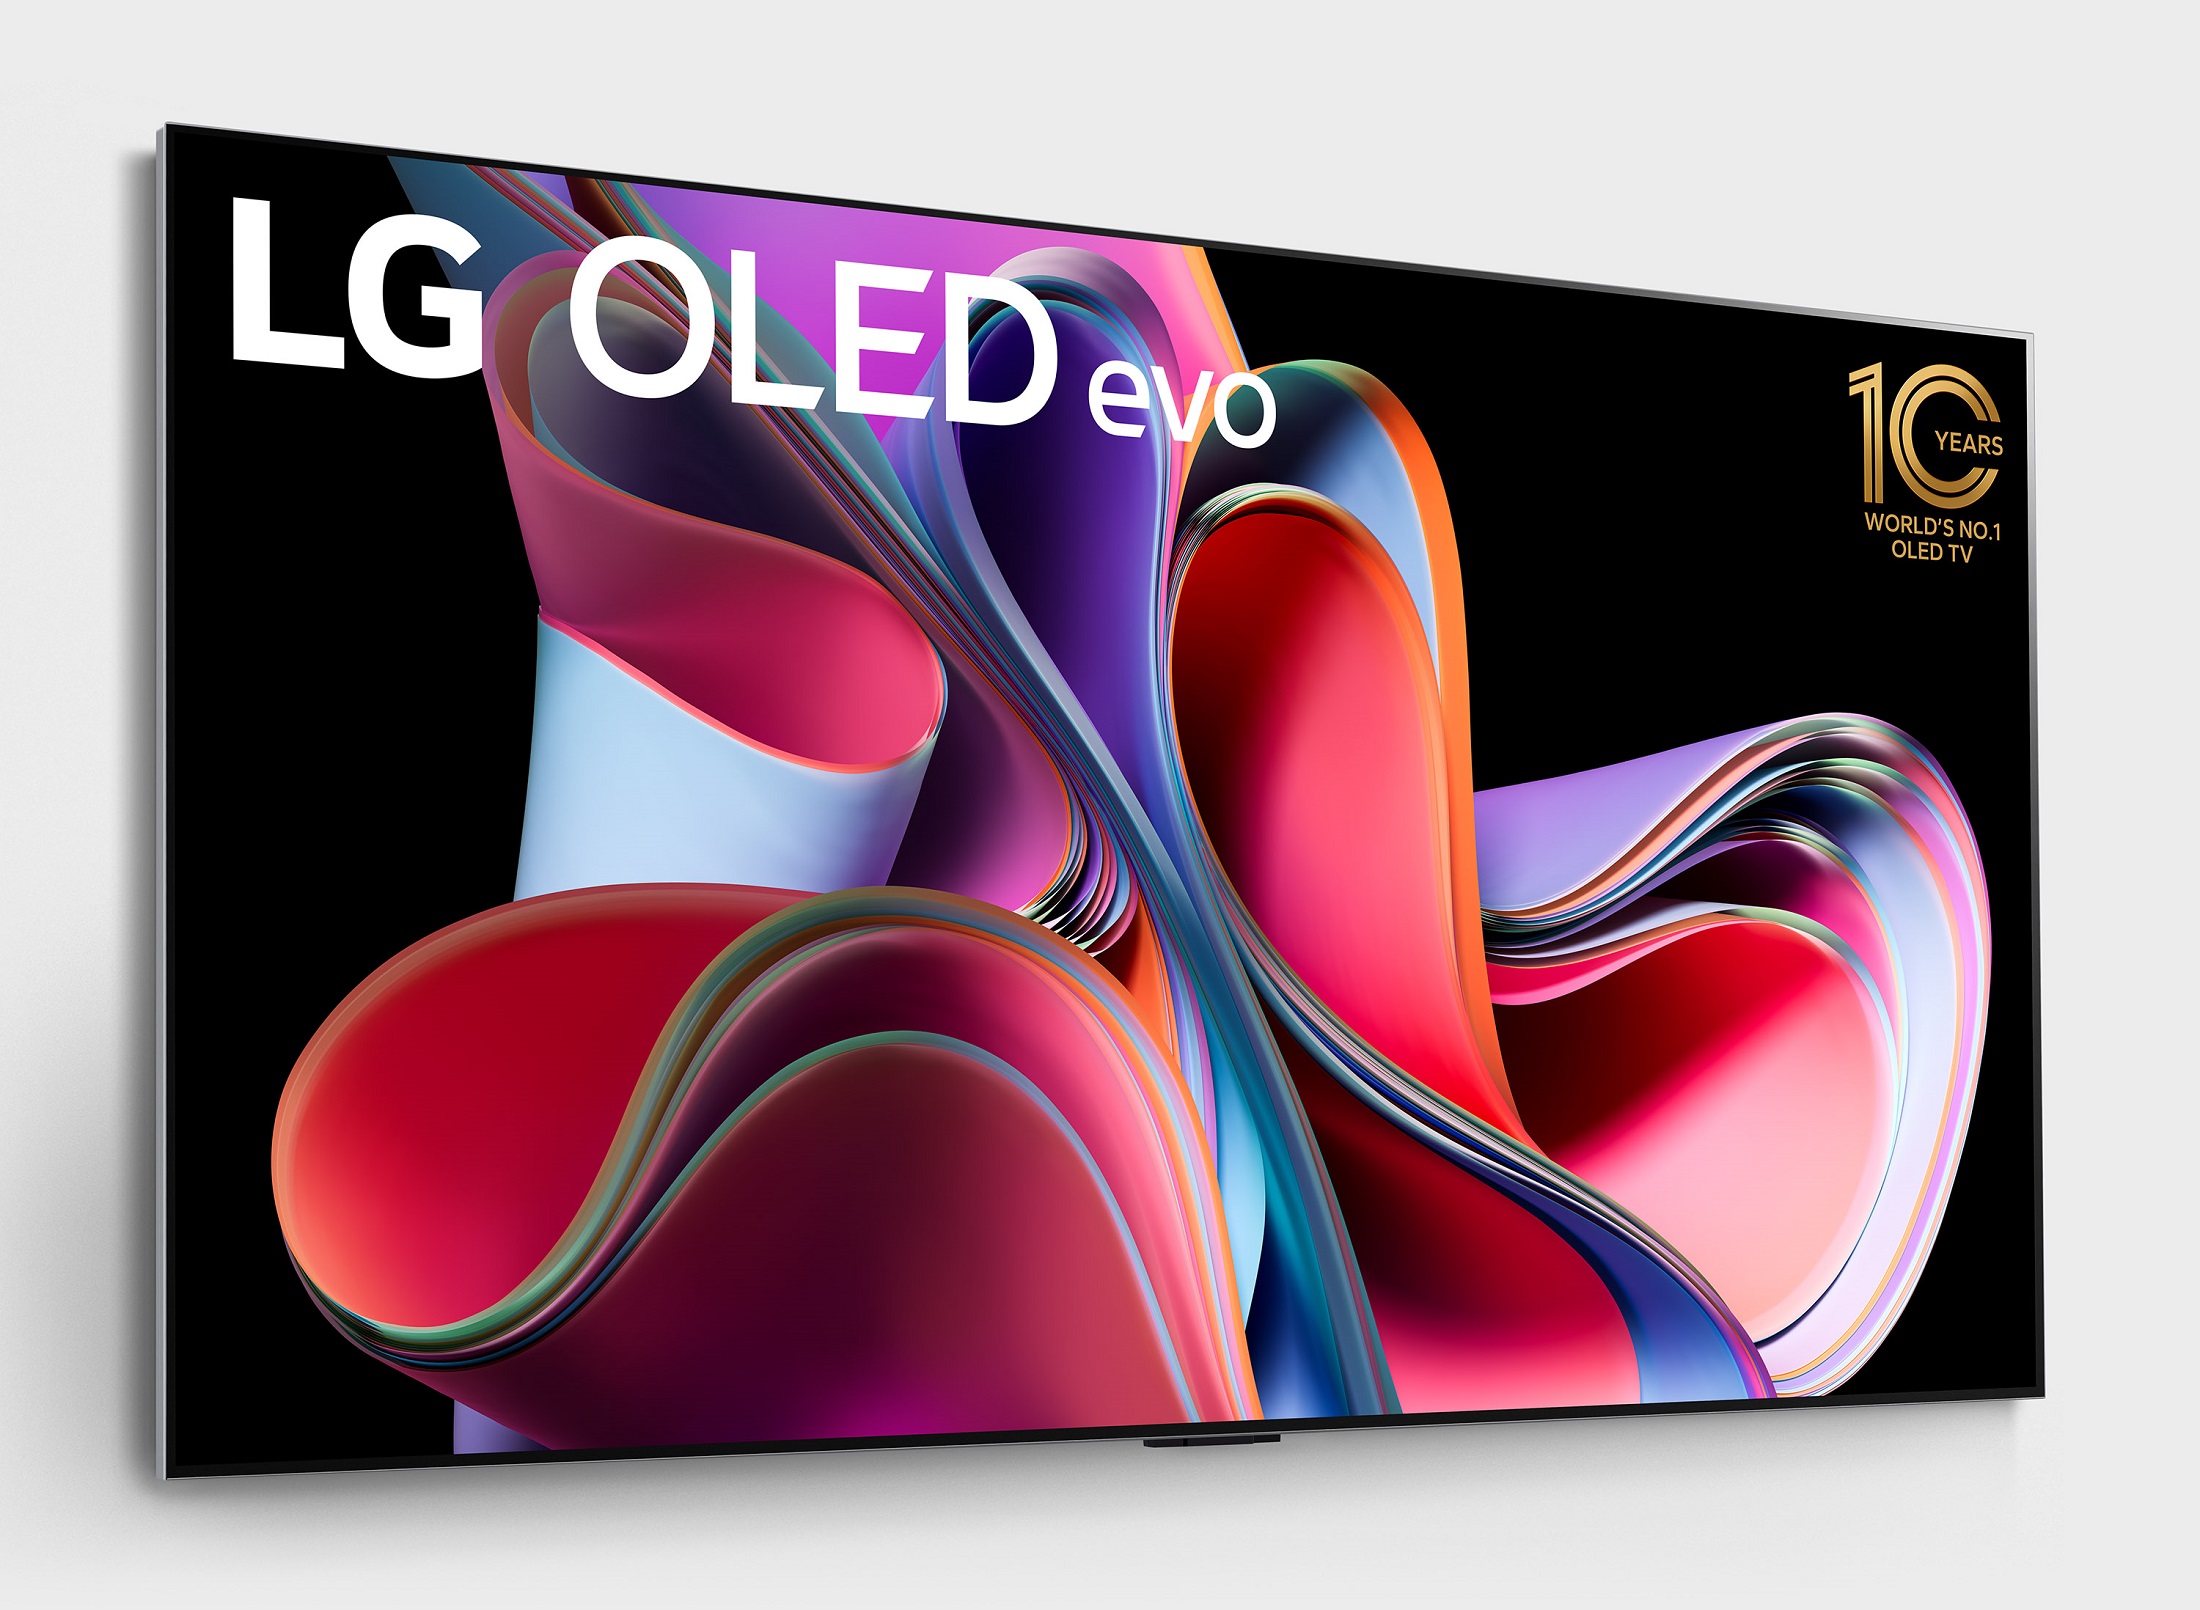 The wall-mounted 2023 LG OLED evo TV with a logo marking LG OLED TV’s 10 years of dominance in the screen’s top-right corner